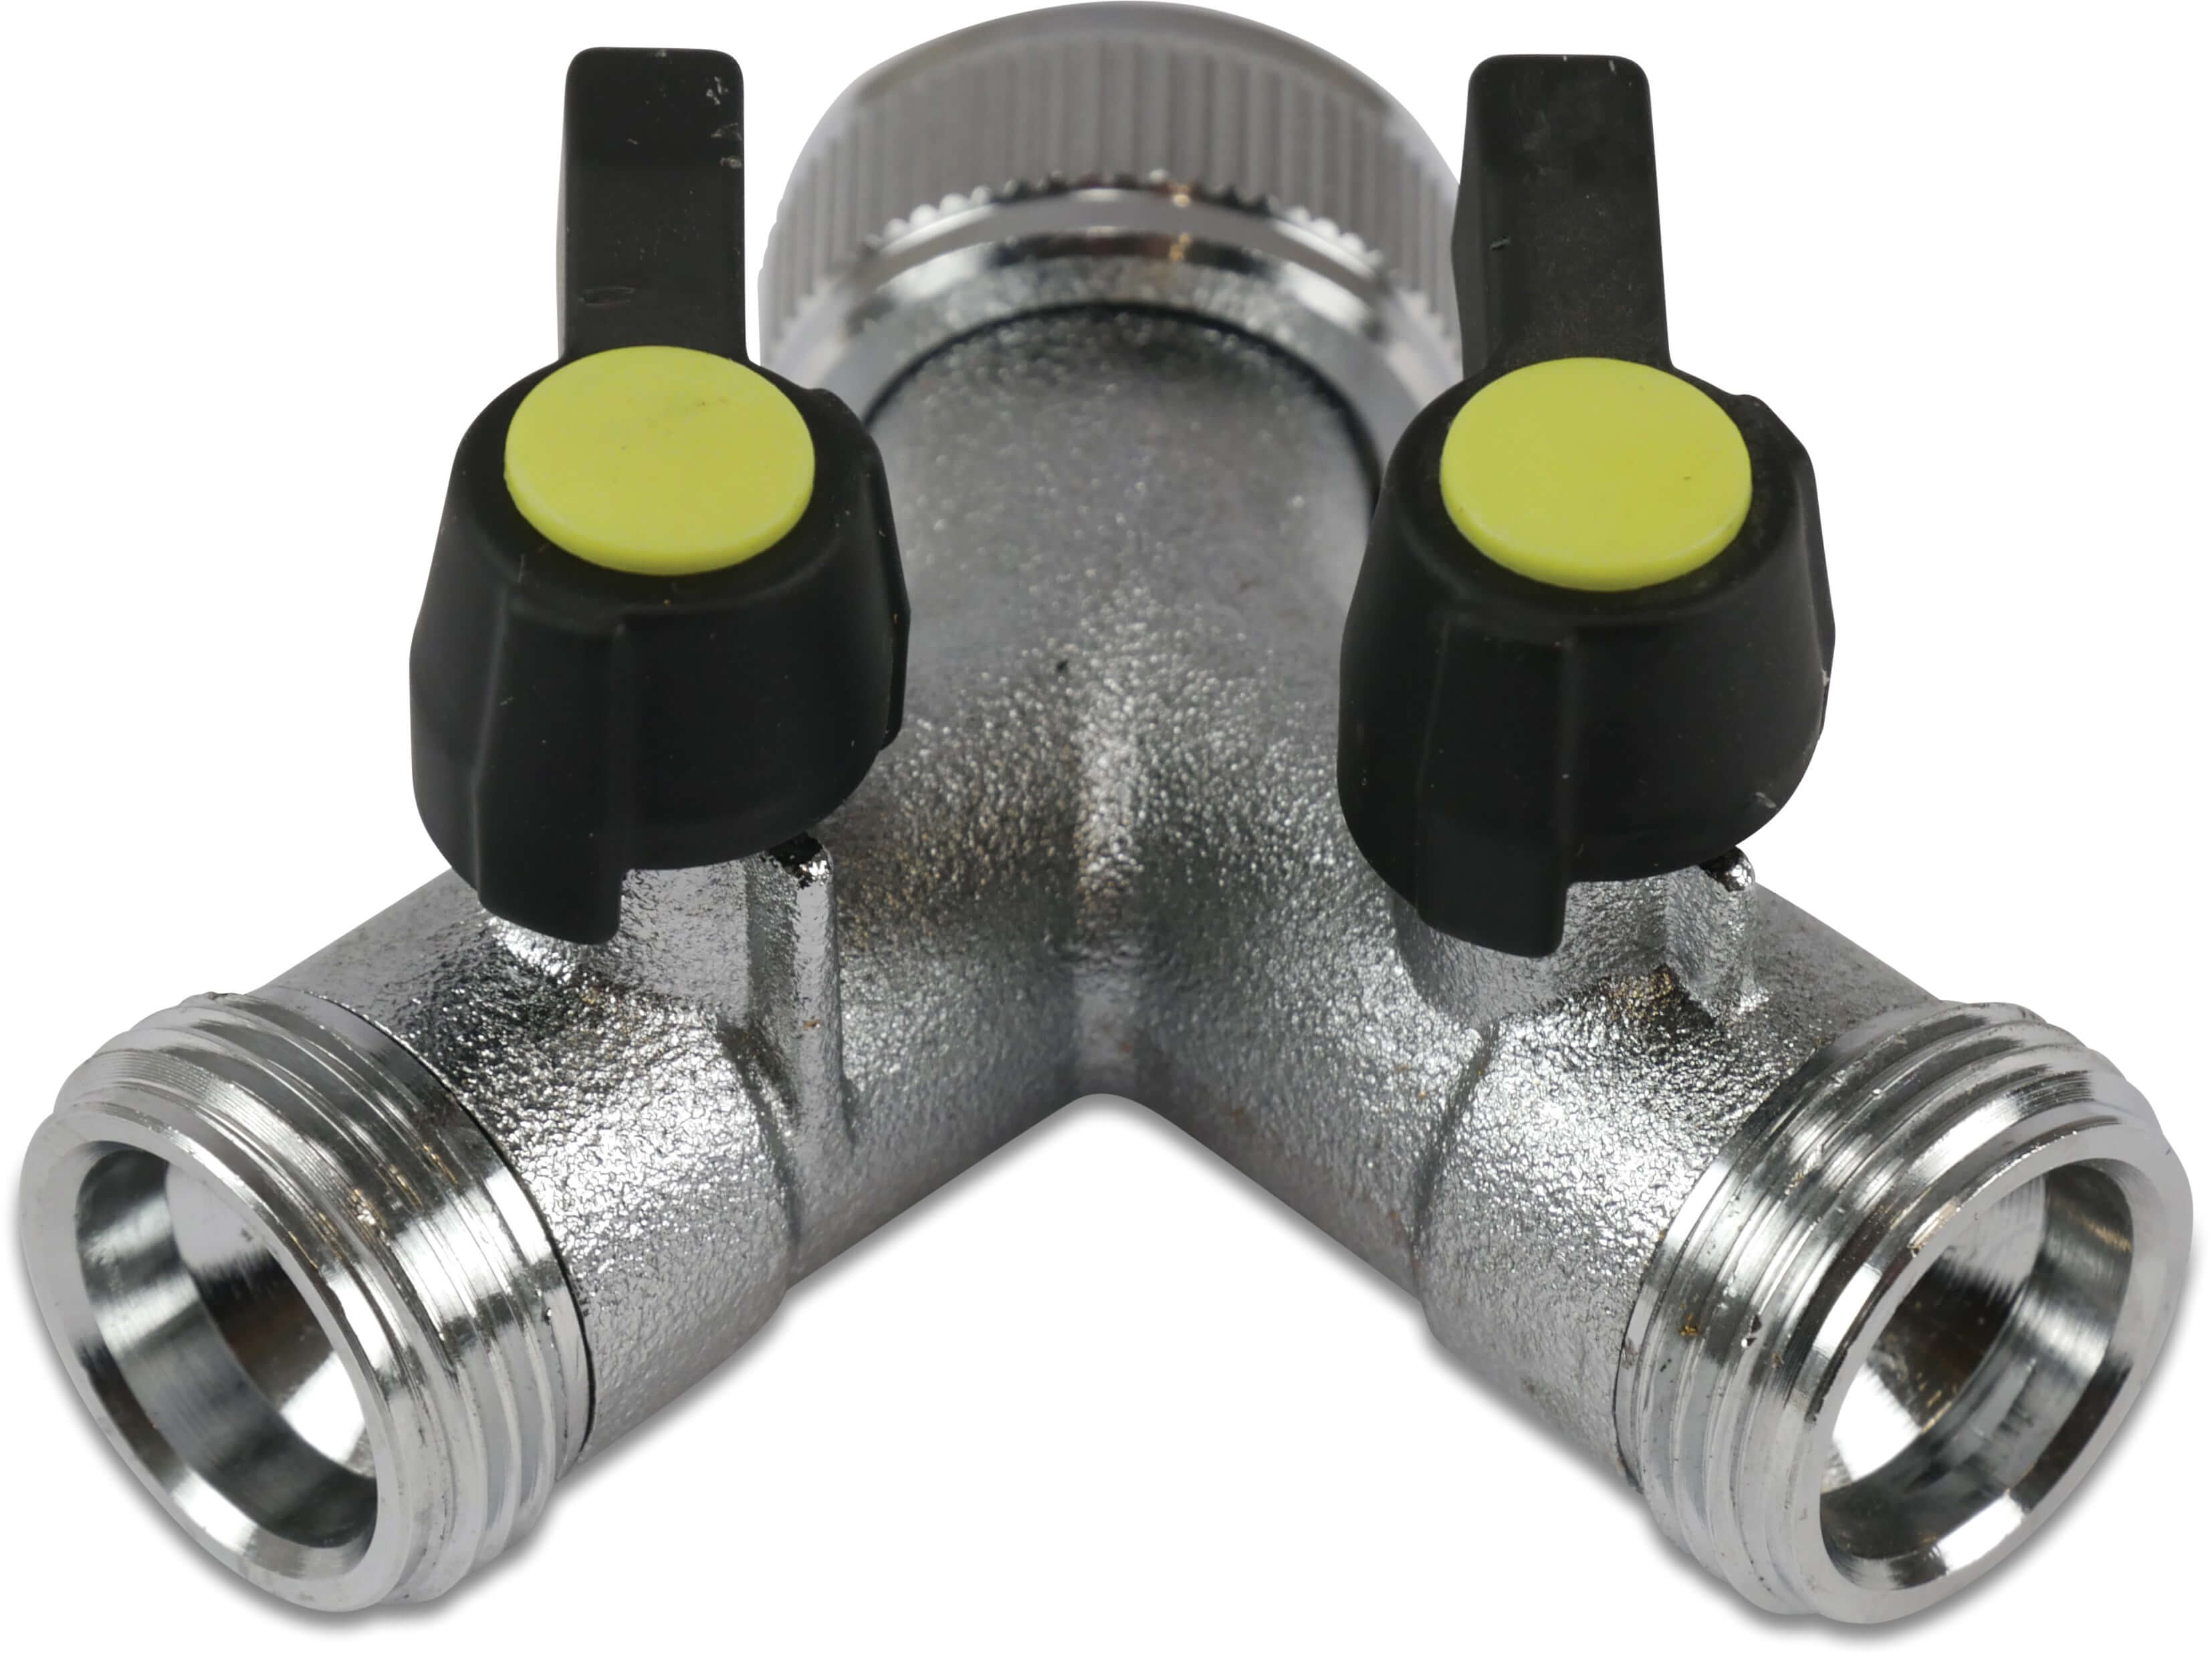 Hydro-S Click connector Y-piece brass 3/4" female threaded nut x male thread x male thread type with ball valve